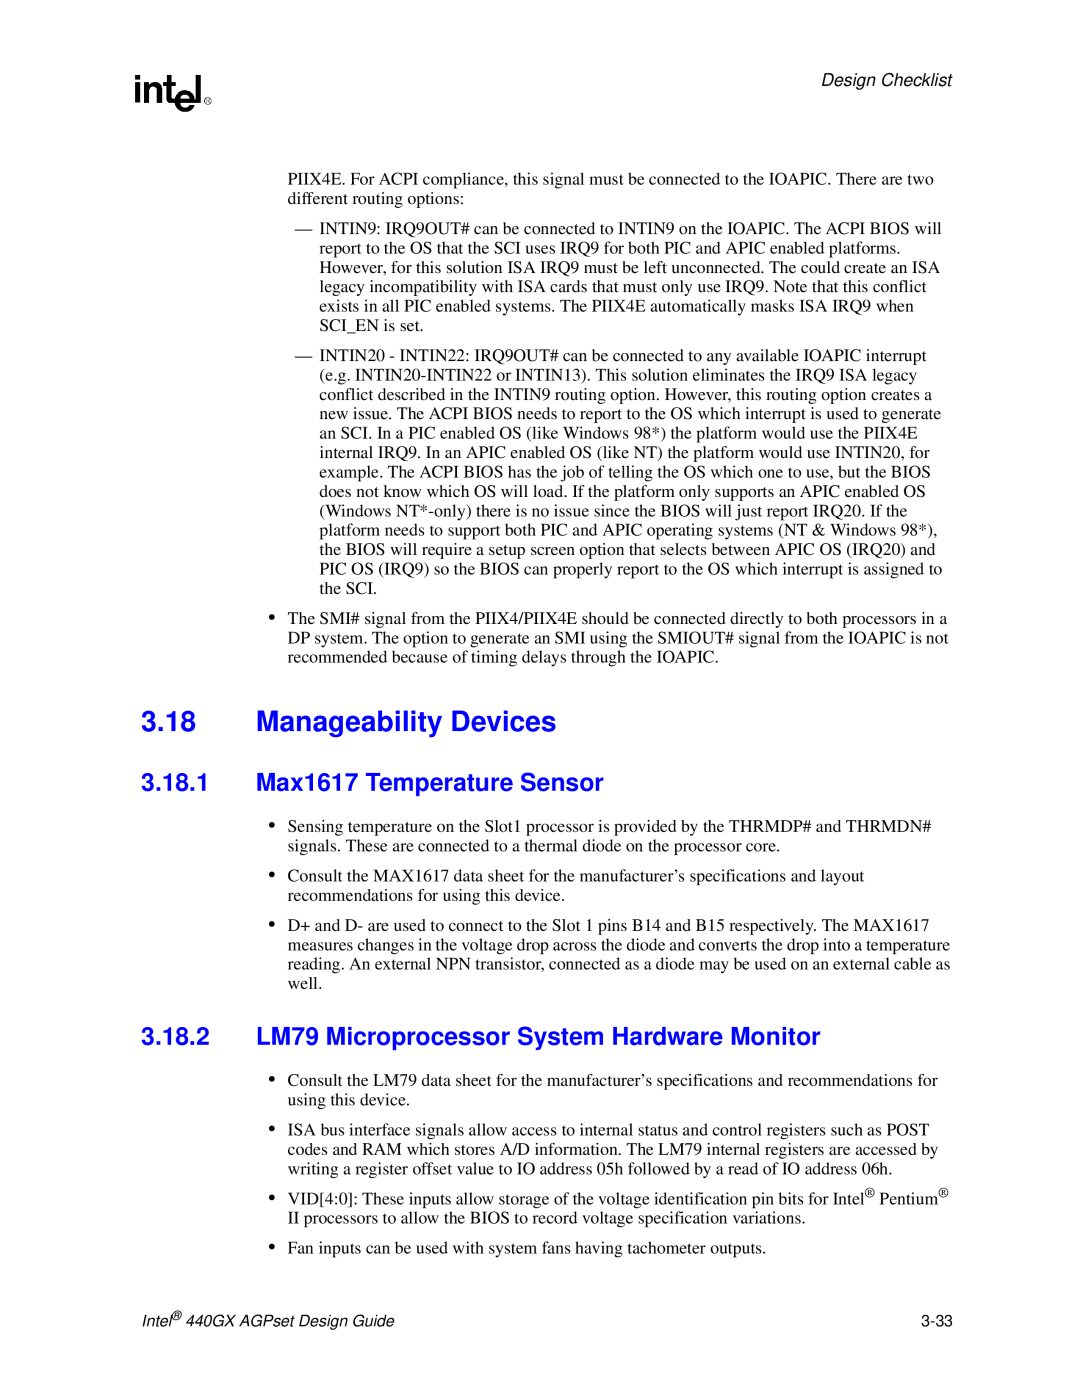 Intel 440GX Manageability Devices, 3.18.1 Max1617 Temperature Sensor, 3.18.2 LM79 Microprocessor System Hardware Monitor 